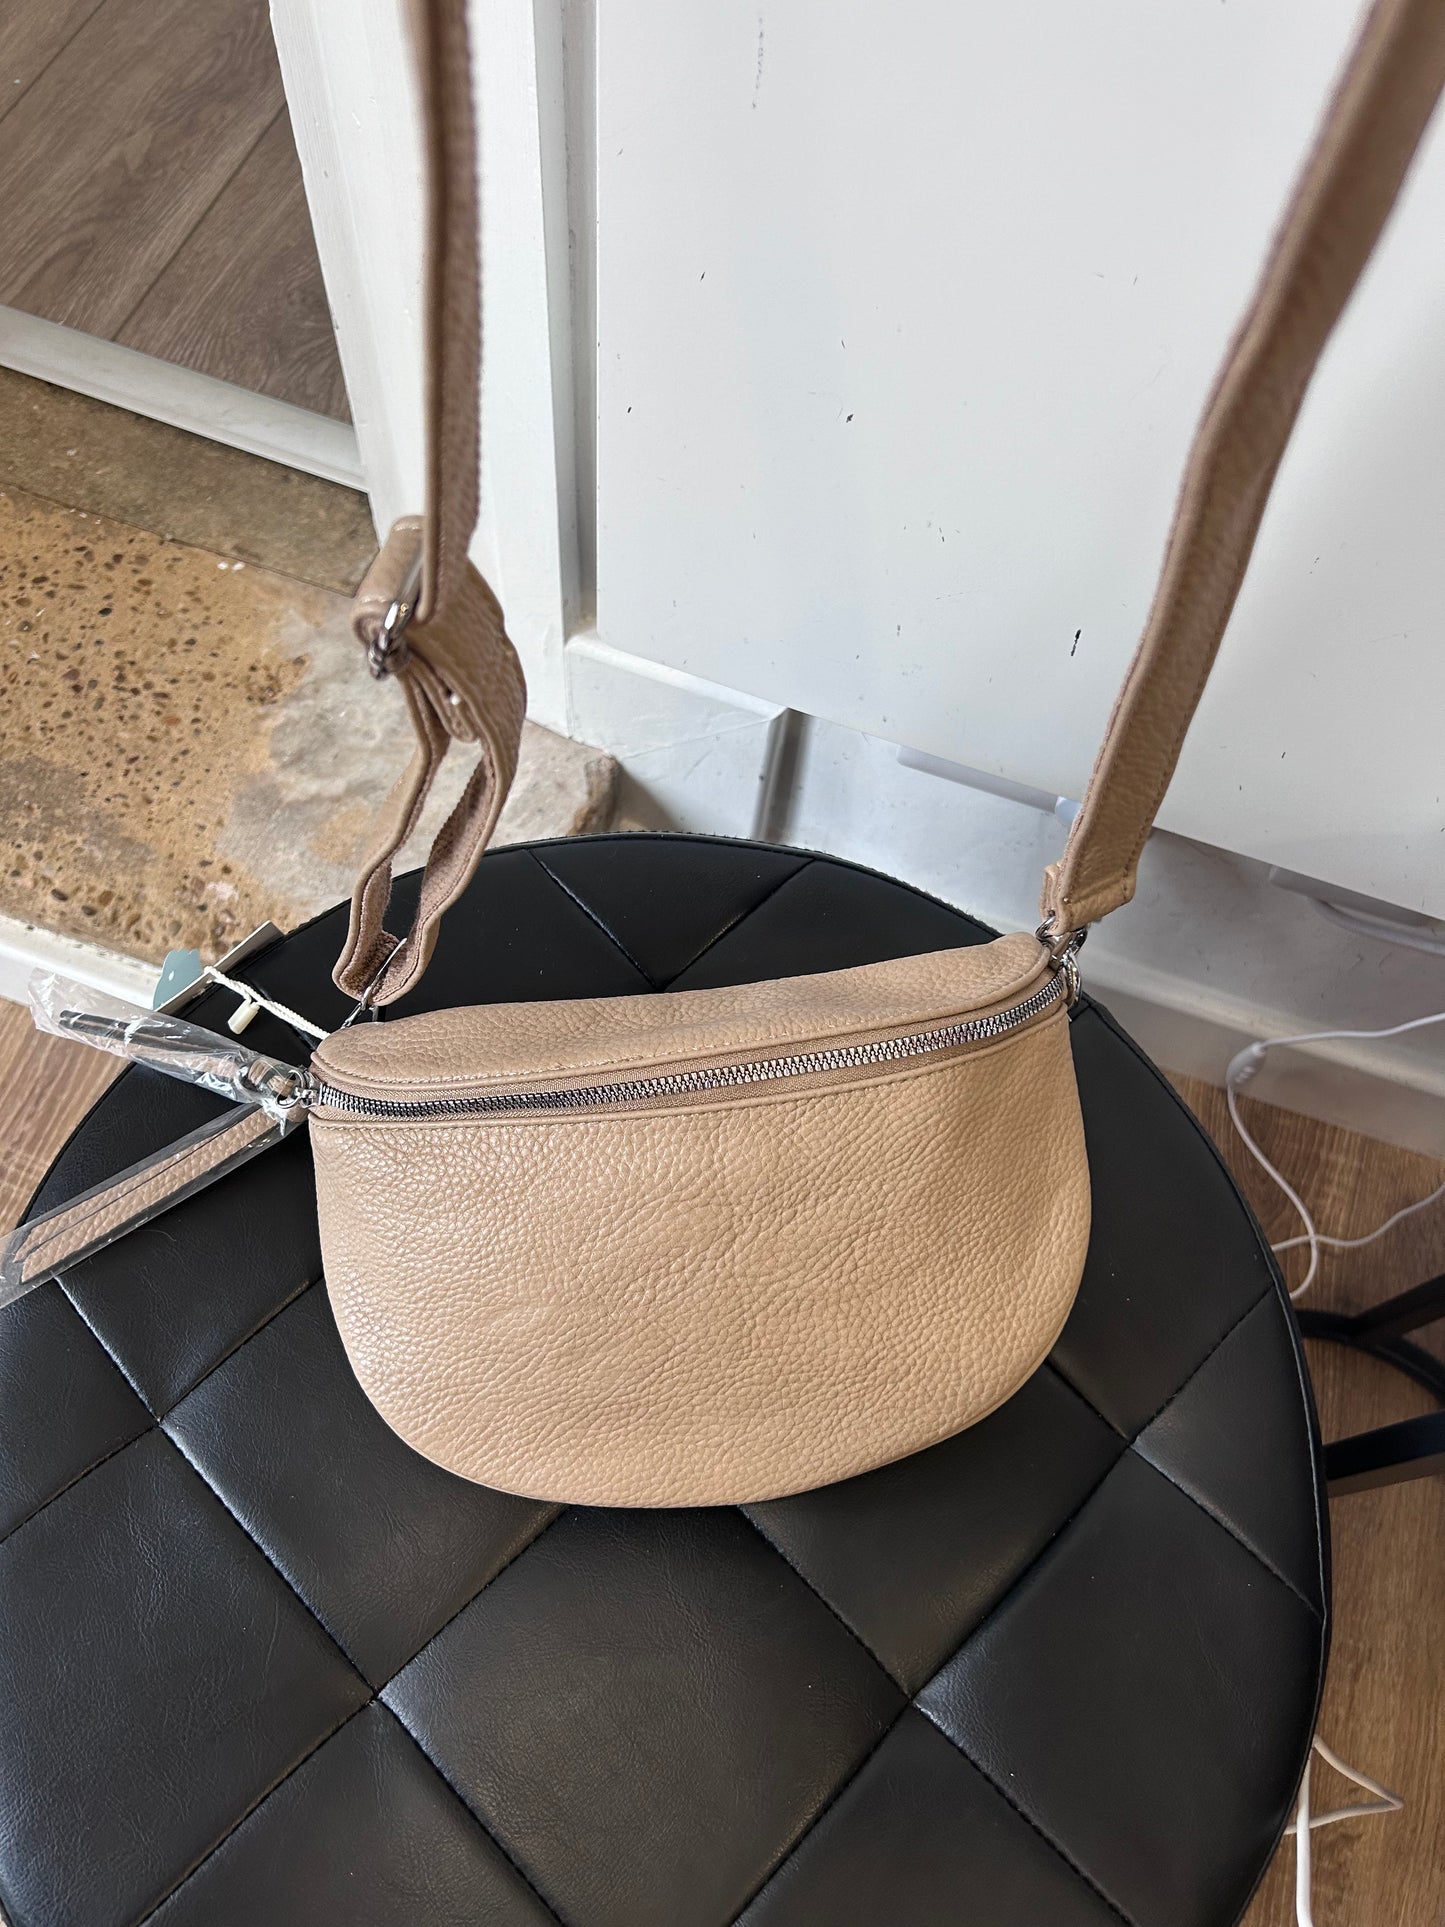 Sling Bags (Leather or Vegan Friendly)